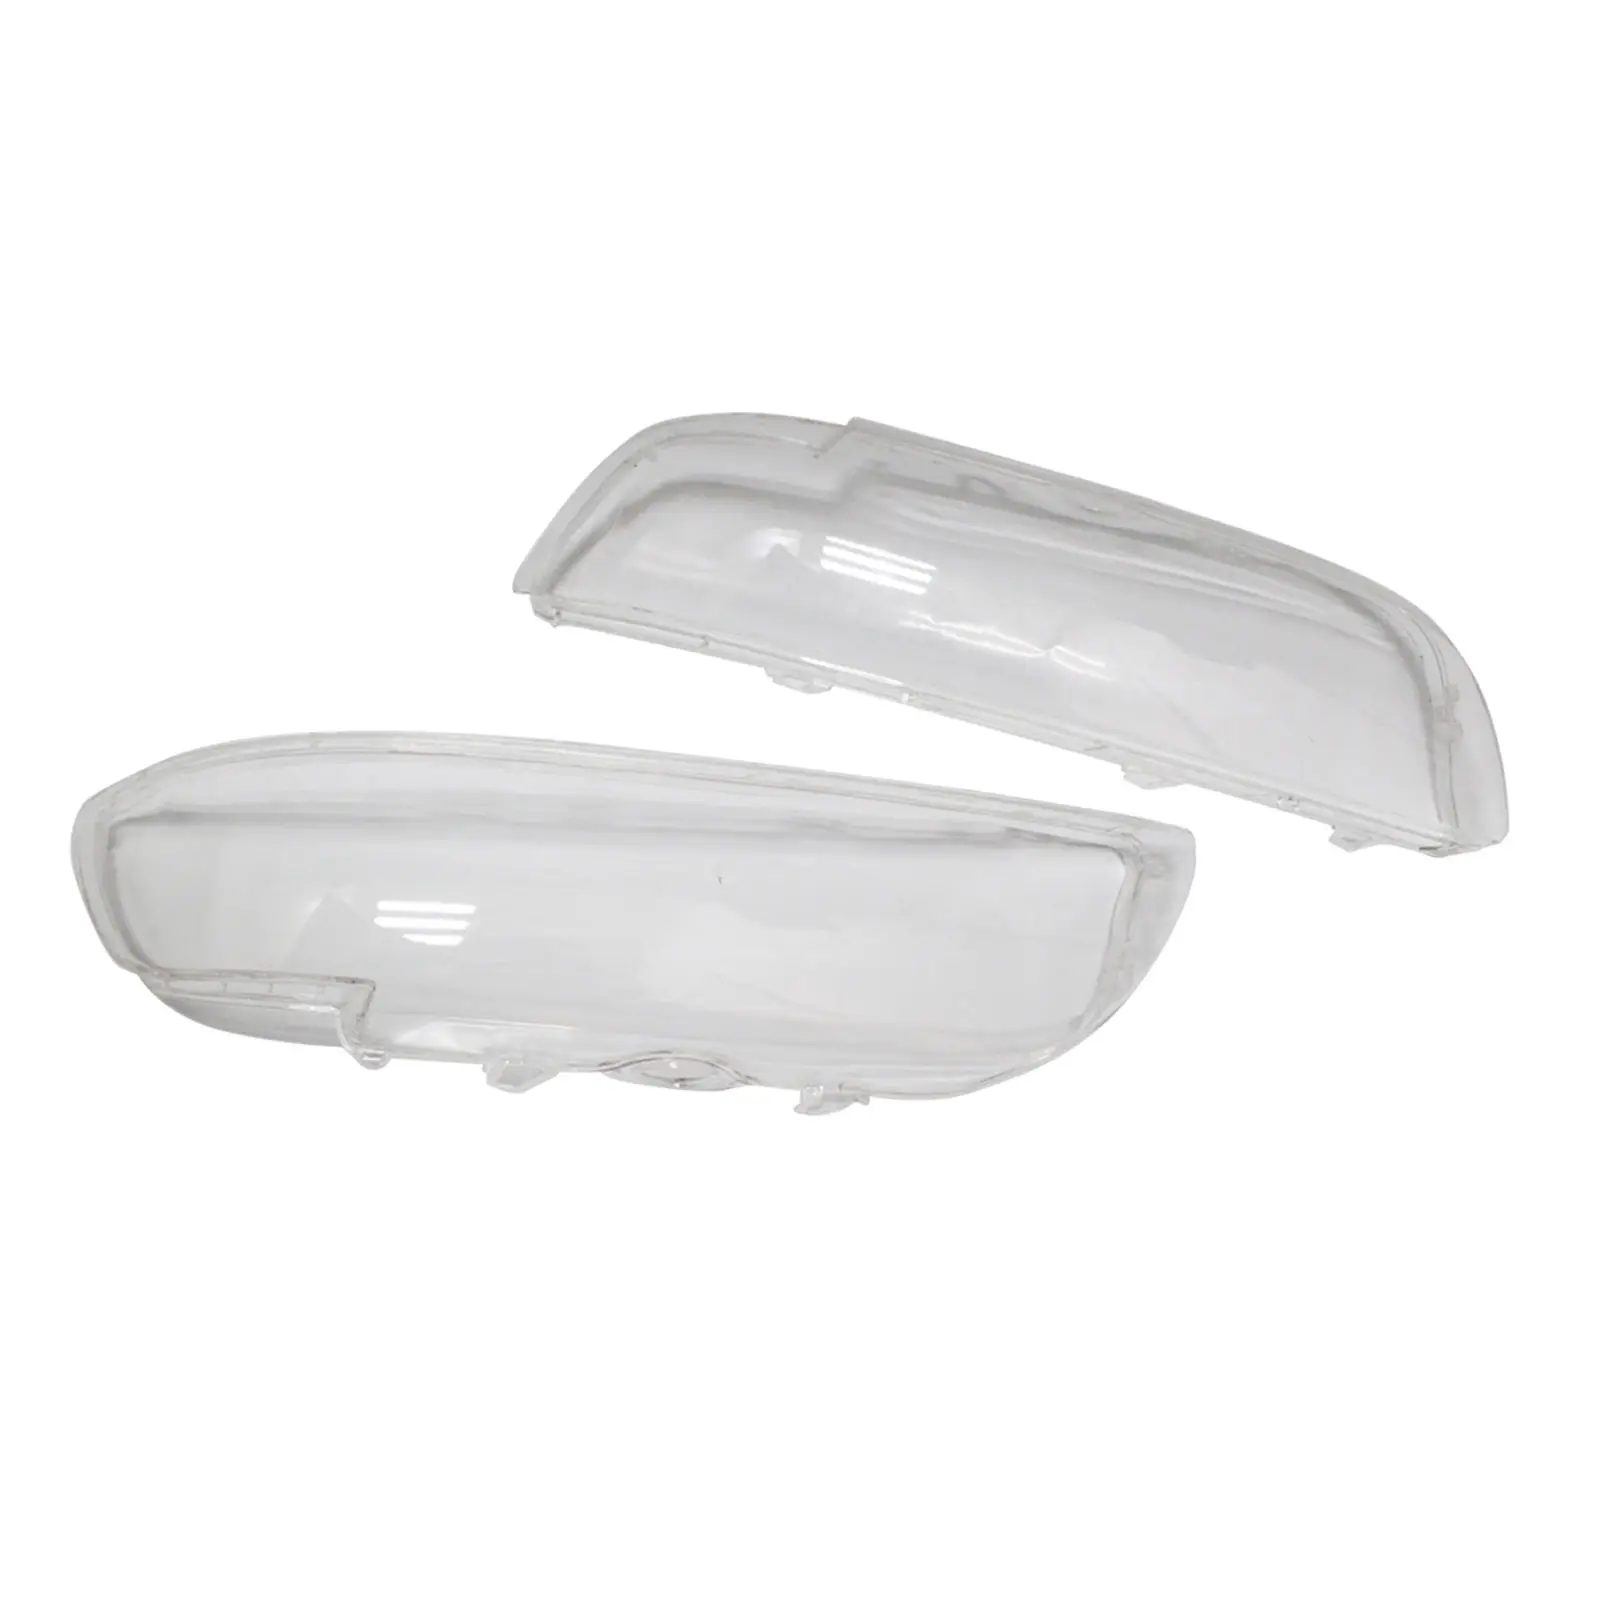 2x Right and Left Headlight Headlamp Lens Cover Compatible Replacements for  E39 523 525 528 530 Durable